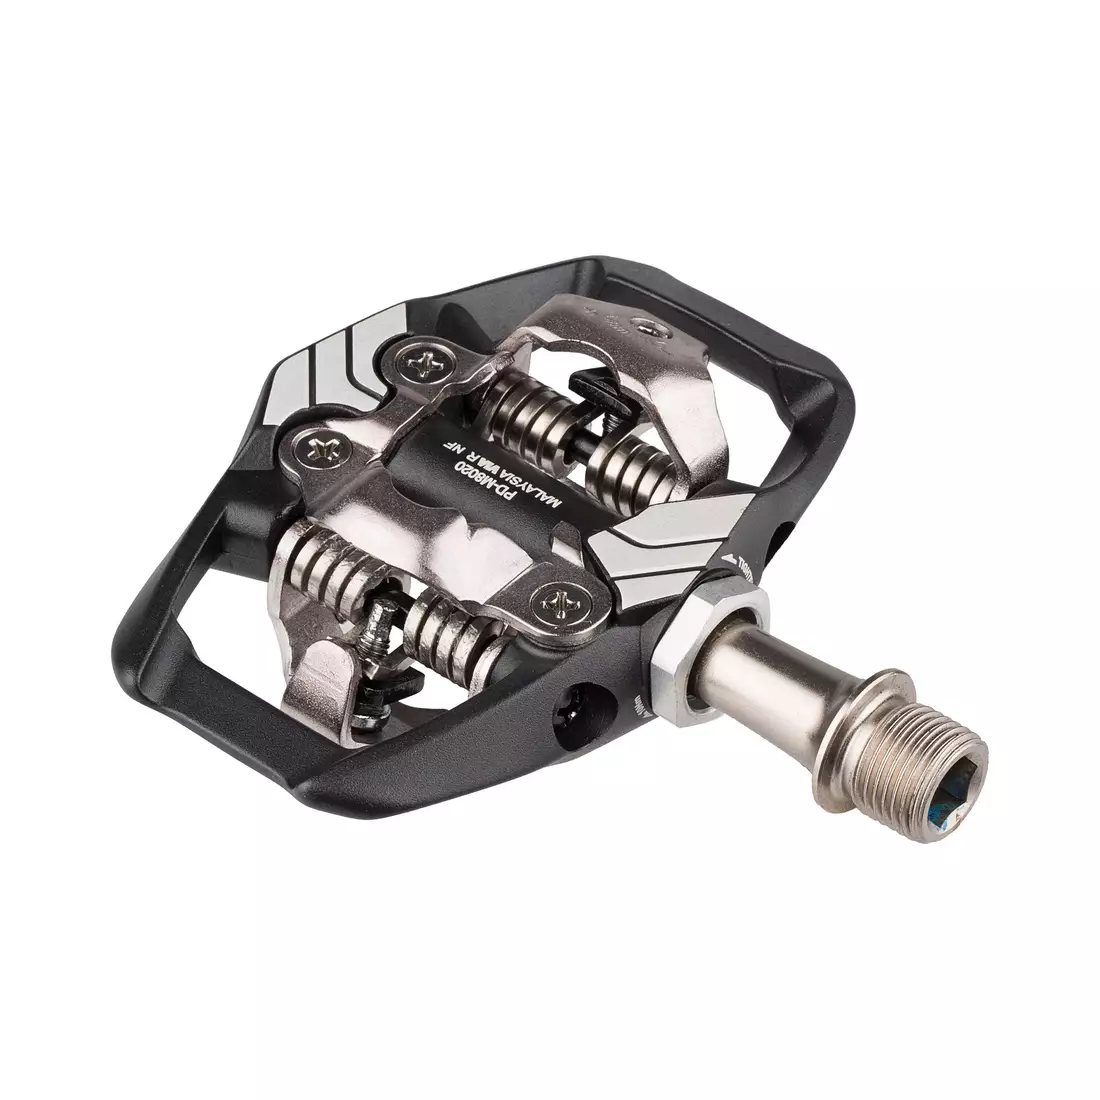 SHIMANO SPD PD-M8020 XT MTB/ trekking bicycle pedals with cleats